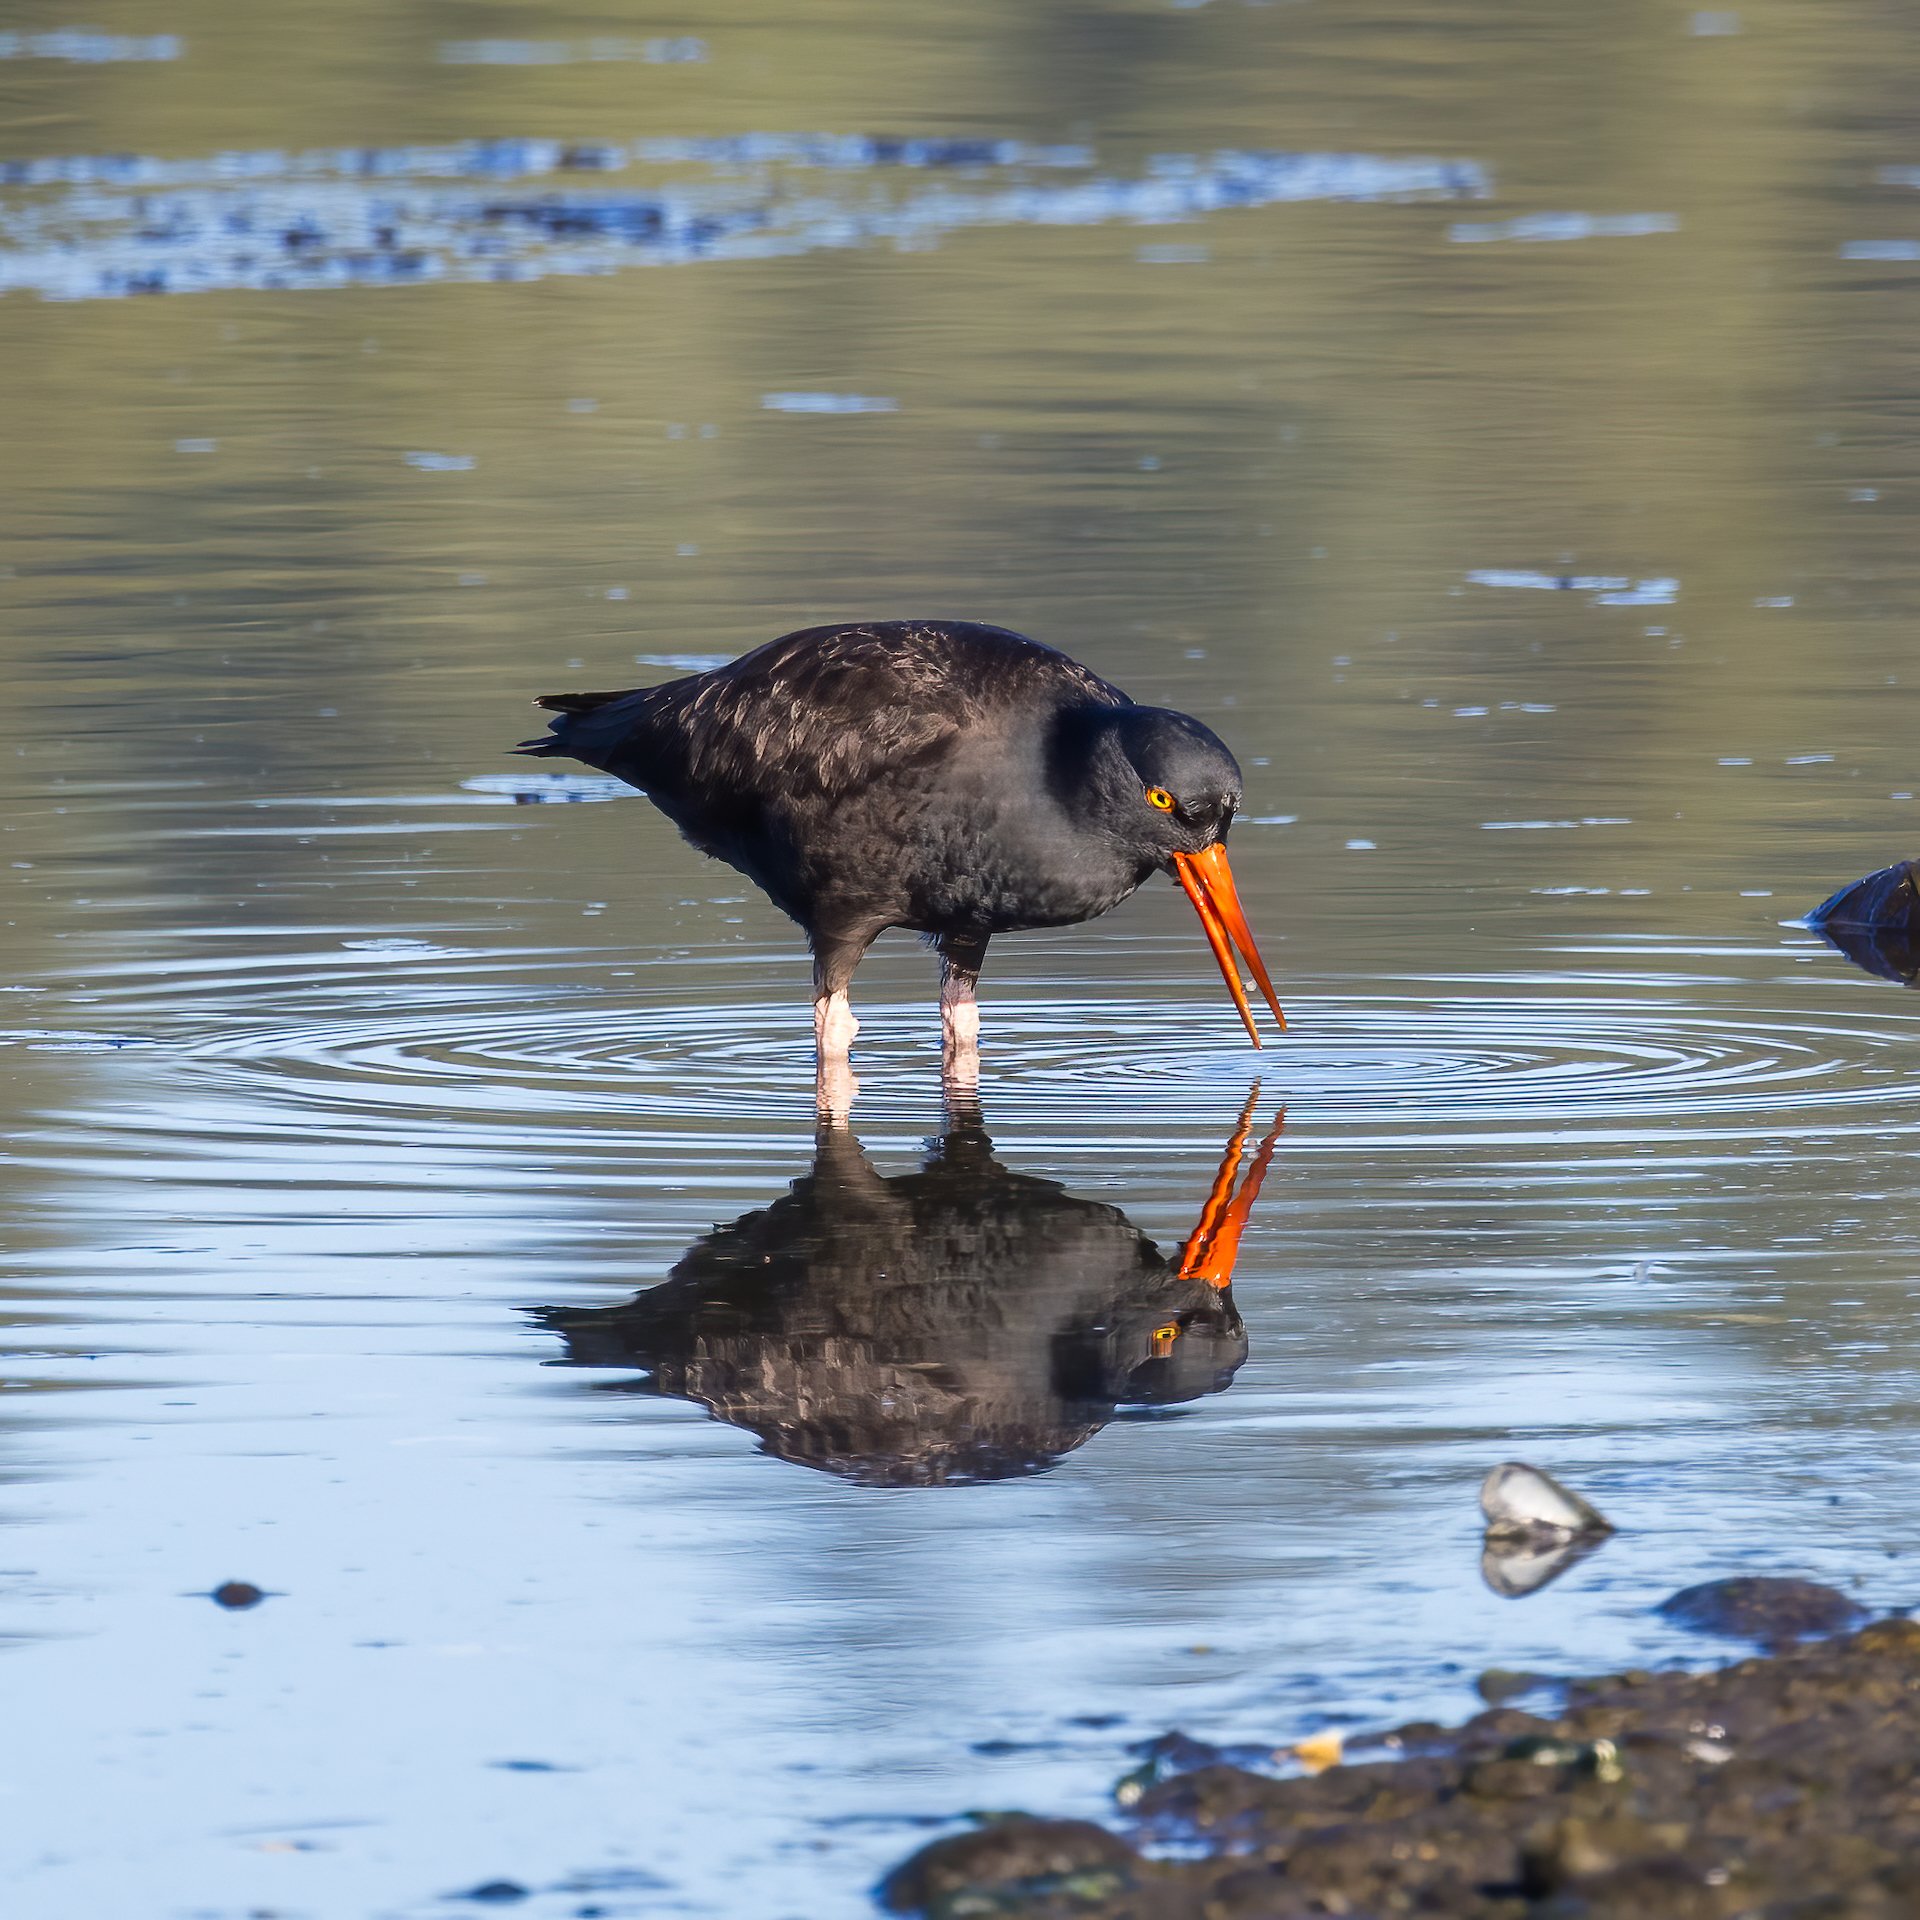  Oyster Catcher - not sure what that would be that he’s eating.  